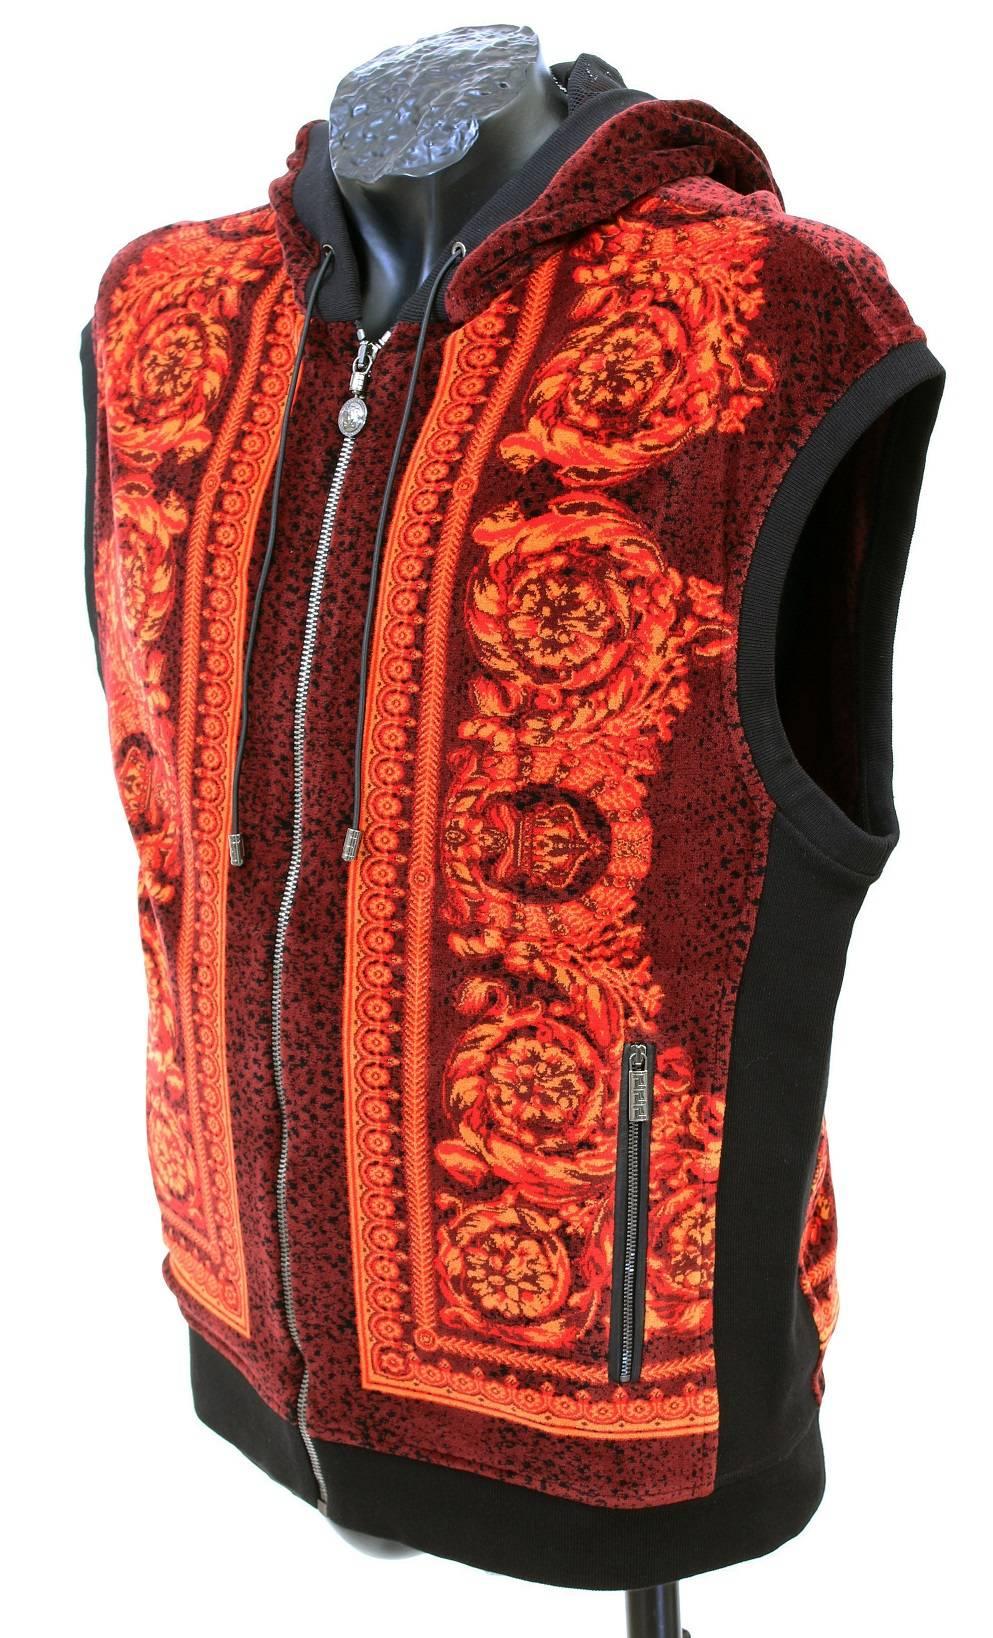 VERSACE VELVET JACKET for MEN


Rich baroque printed velvet sleeveless jacket from Versace featuring a hood, a front zip and leather trim.
The hood has mesh lining. Two side pockets.
Two inner IPOD size pockets
Shell: 82% cotton, 18% Polyamide.